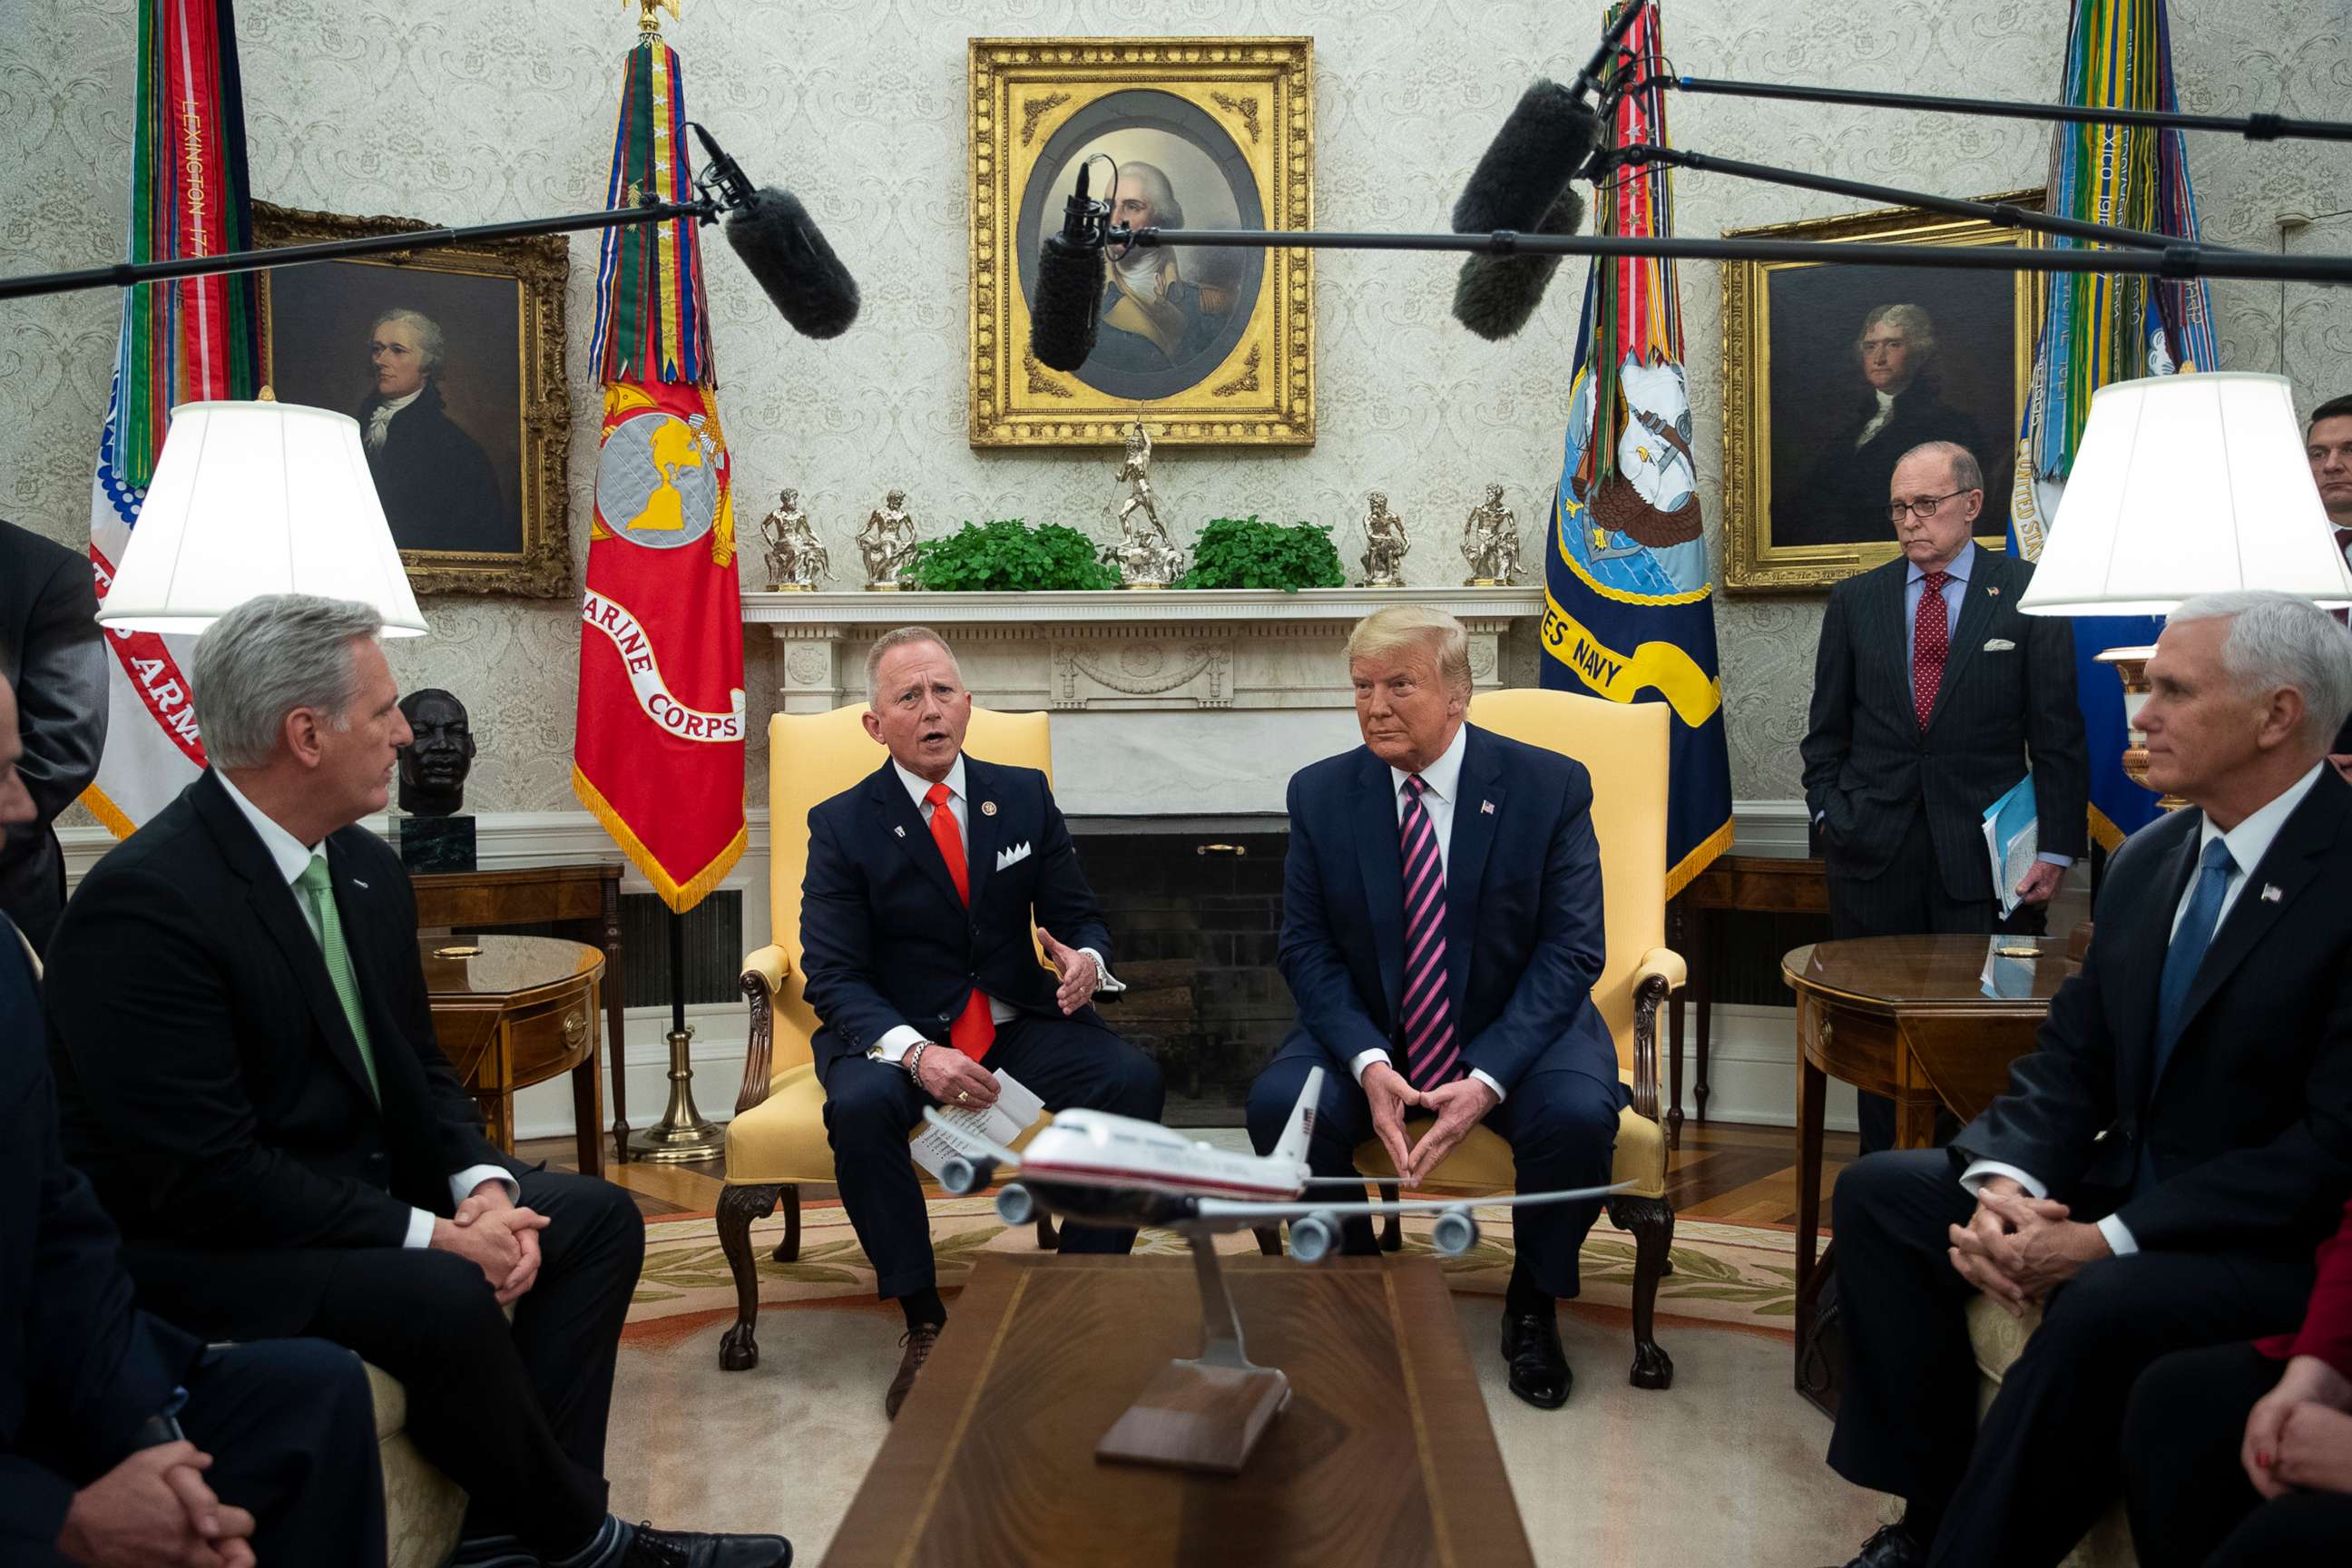 PHOTO: President Donald Trump listens as Rep. Jeff Van Drew, D-N.J., who is planning to switch his party affiliation, speaks during a meeting in the Oval Office of the White House, Dec. 19, 2019, in Washington.